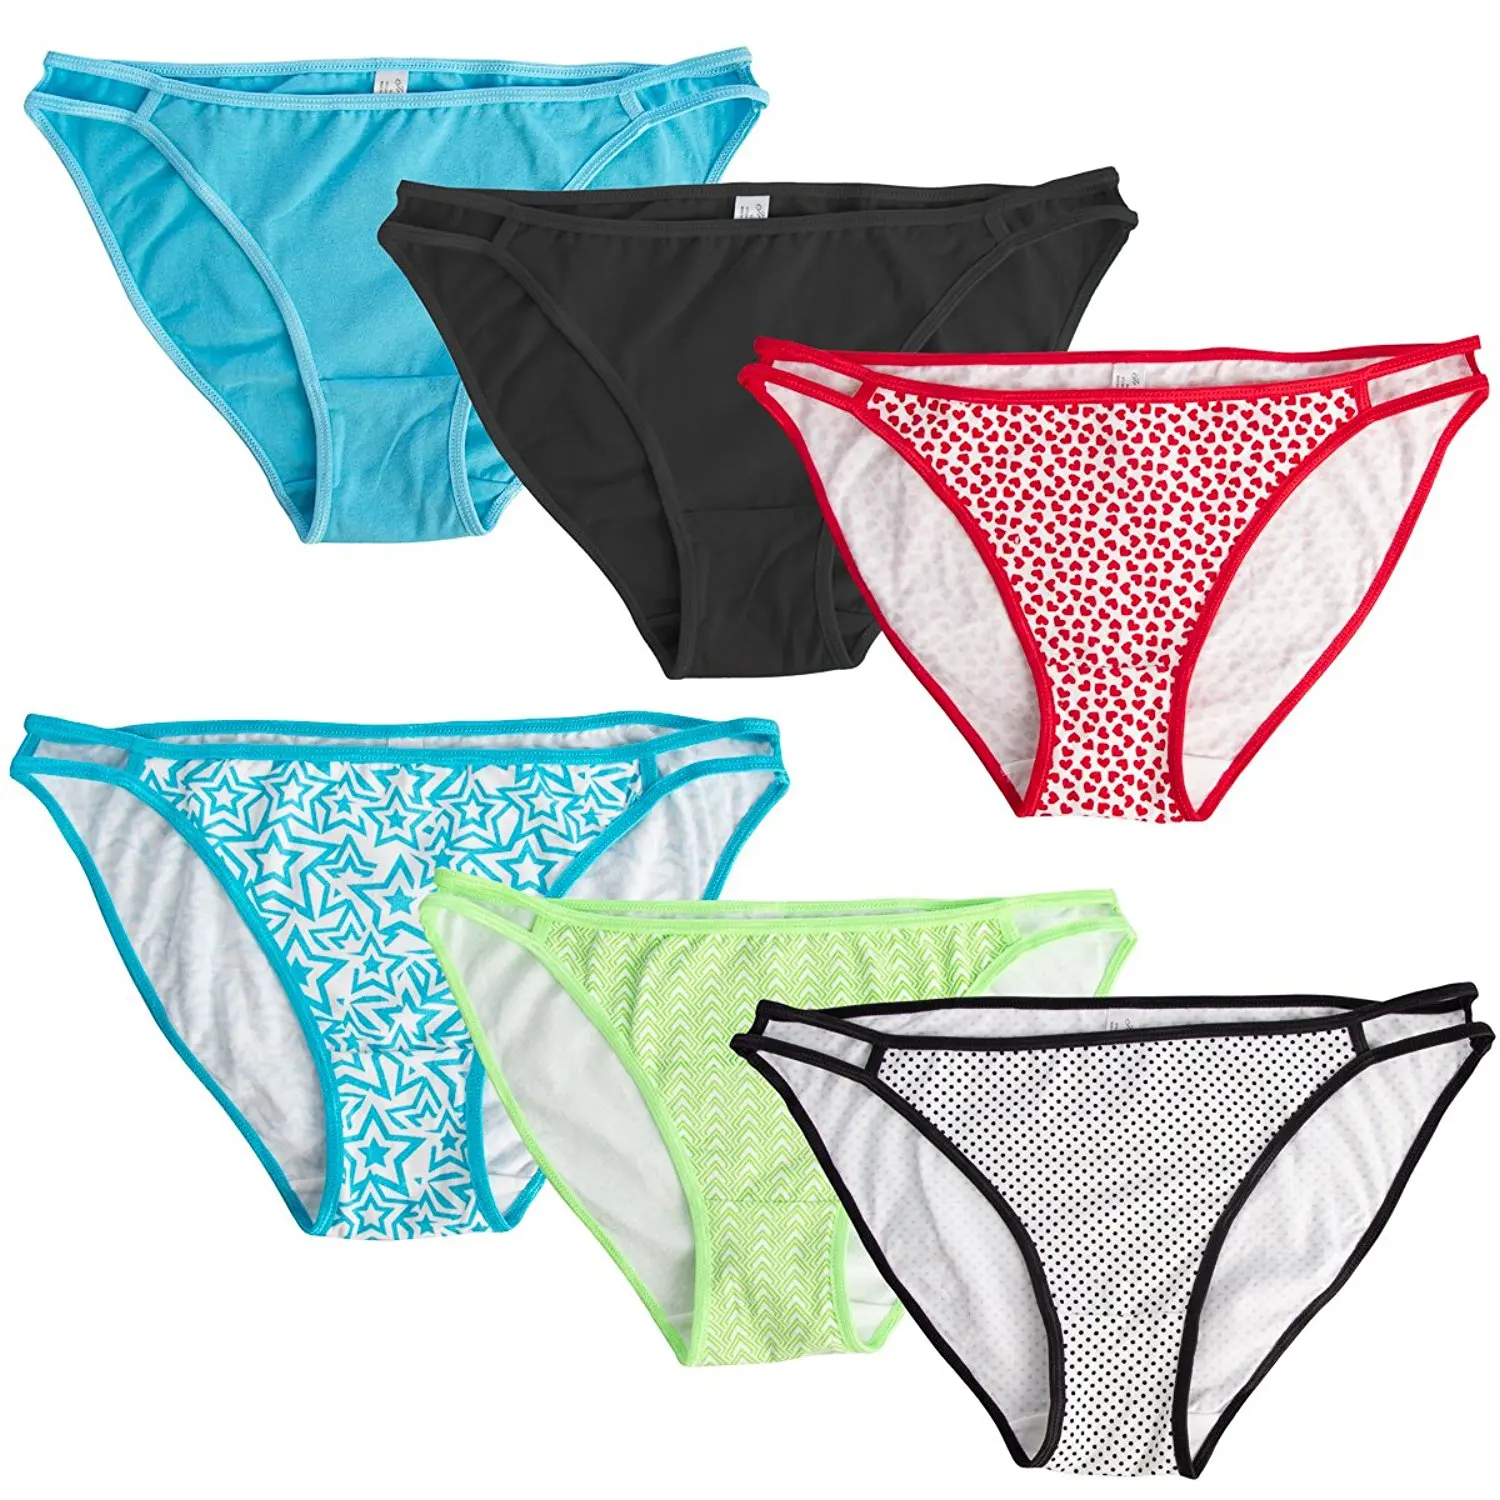 Buy Jo And Bette 6 Pack Ladies Cotton Underwear Lingerie Sexy Thongs For 